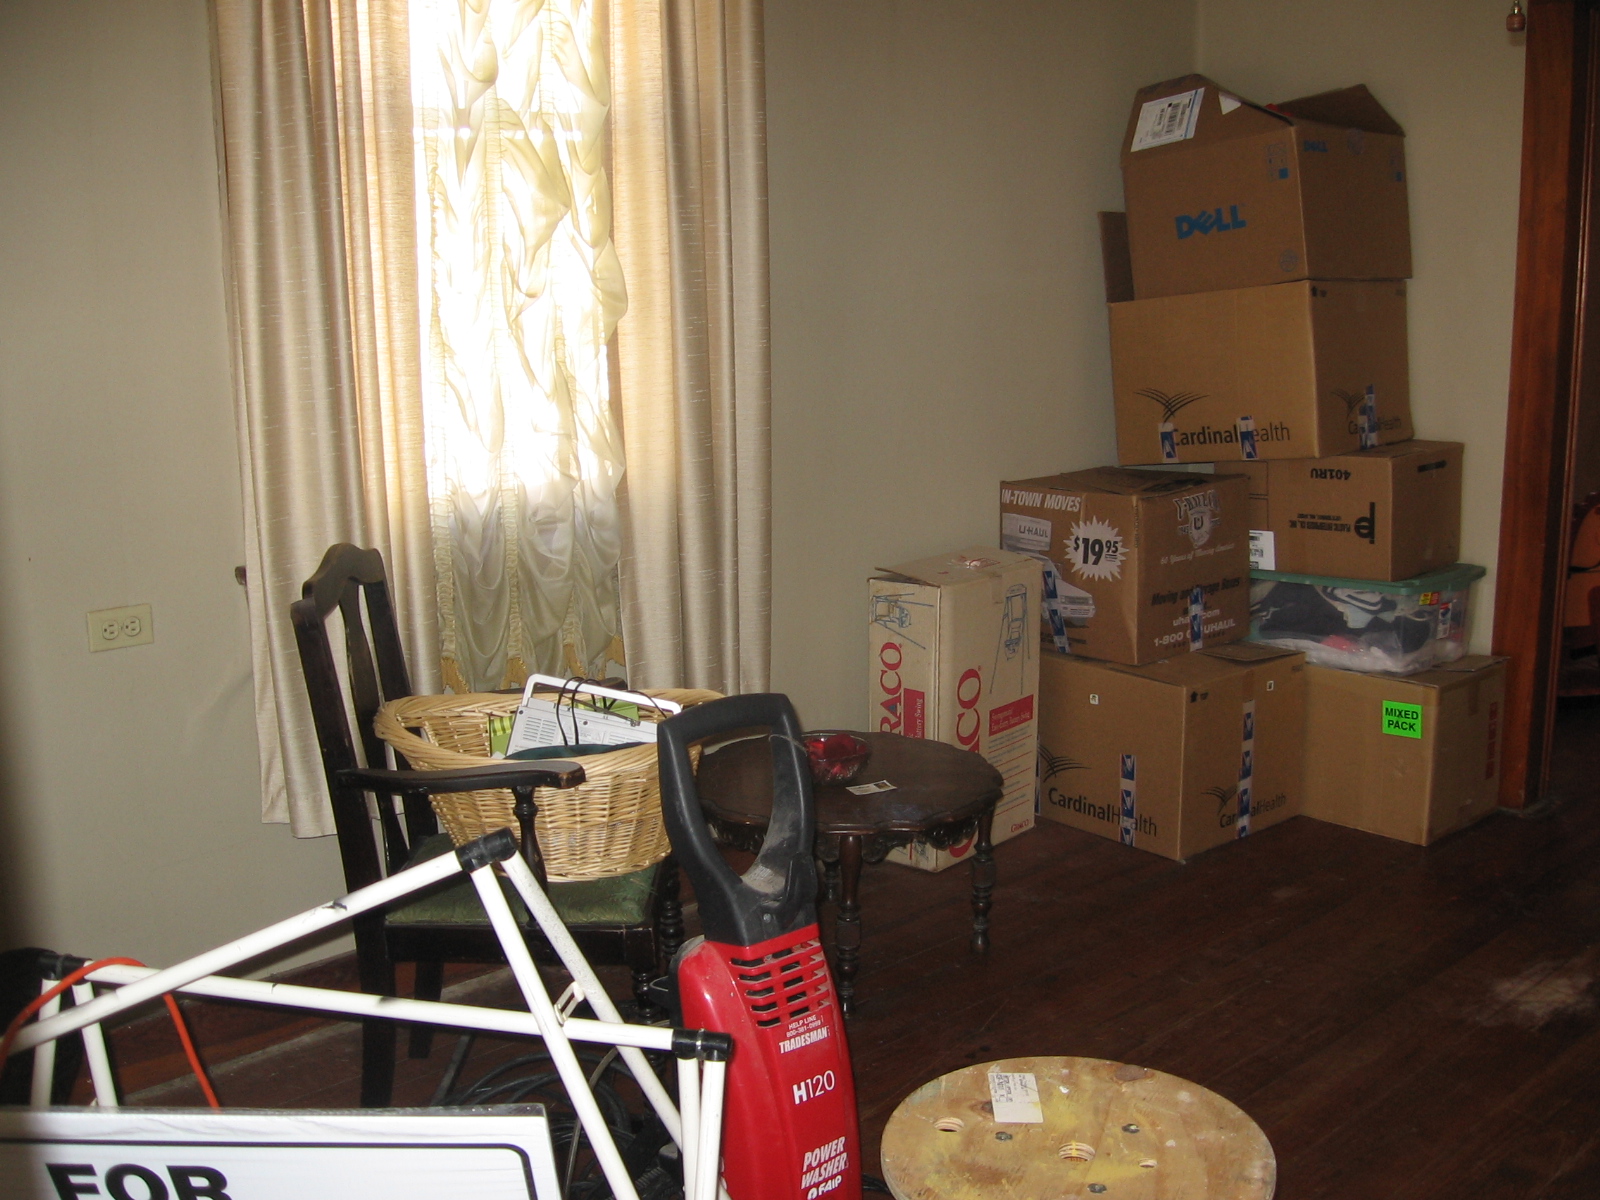 several boxes stacked high in a room with chair, television, coffee table and bike